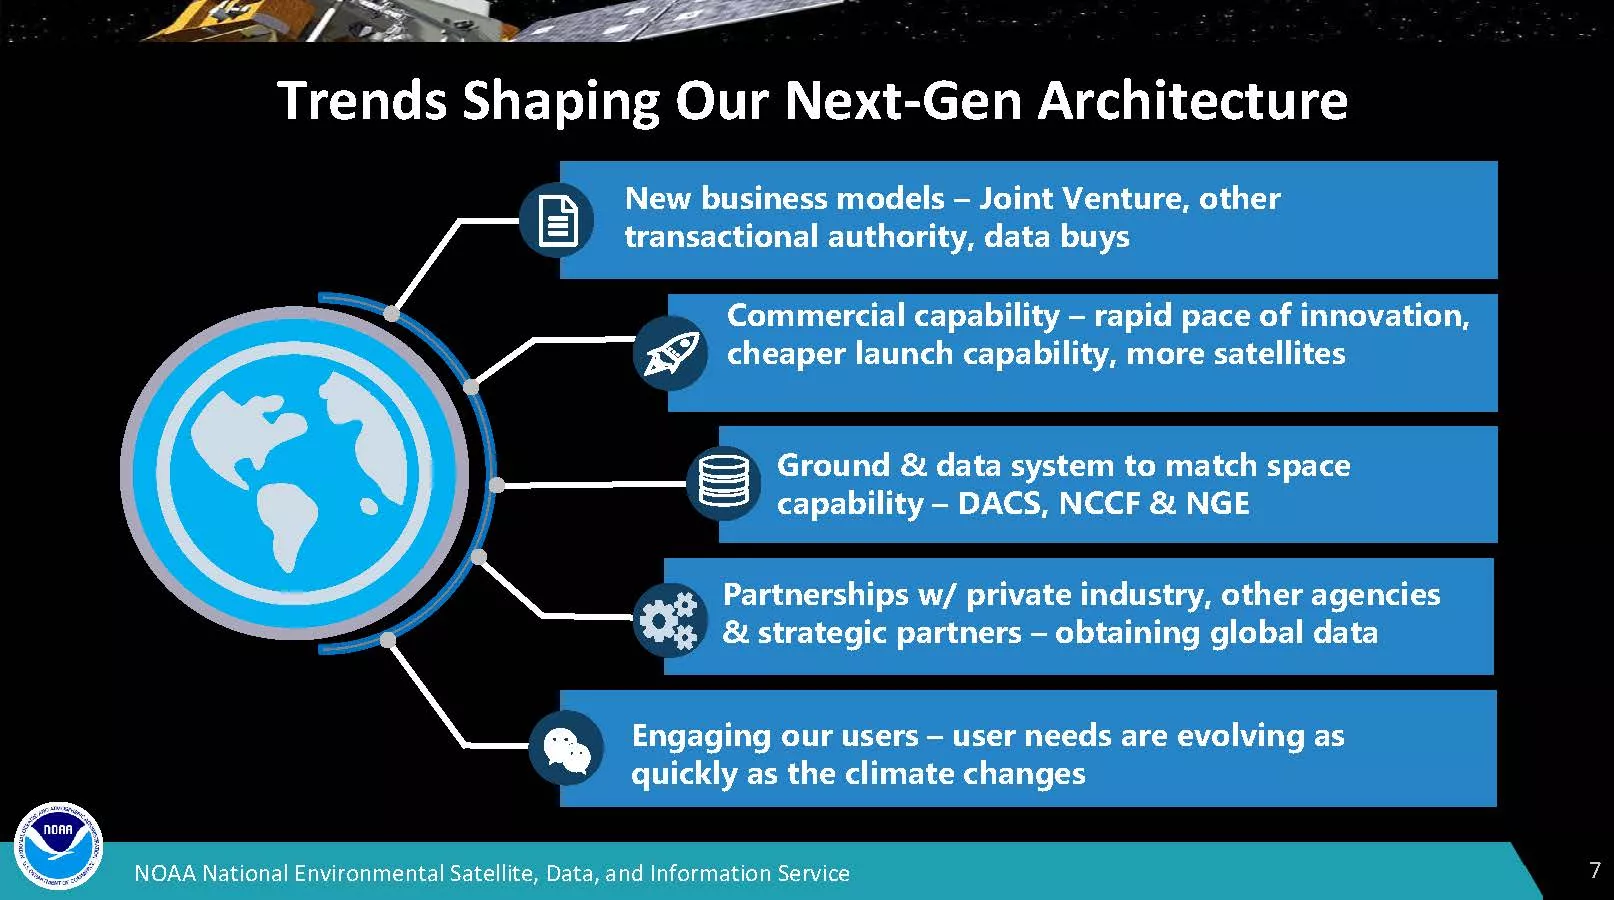 Trends shaping out next-generation architecture: new business models; commercial capability; ground & data systems; partnerships with private industry; engaging our users